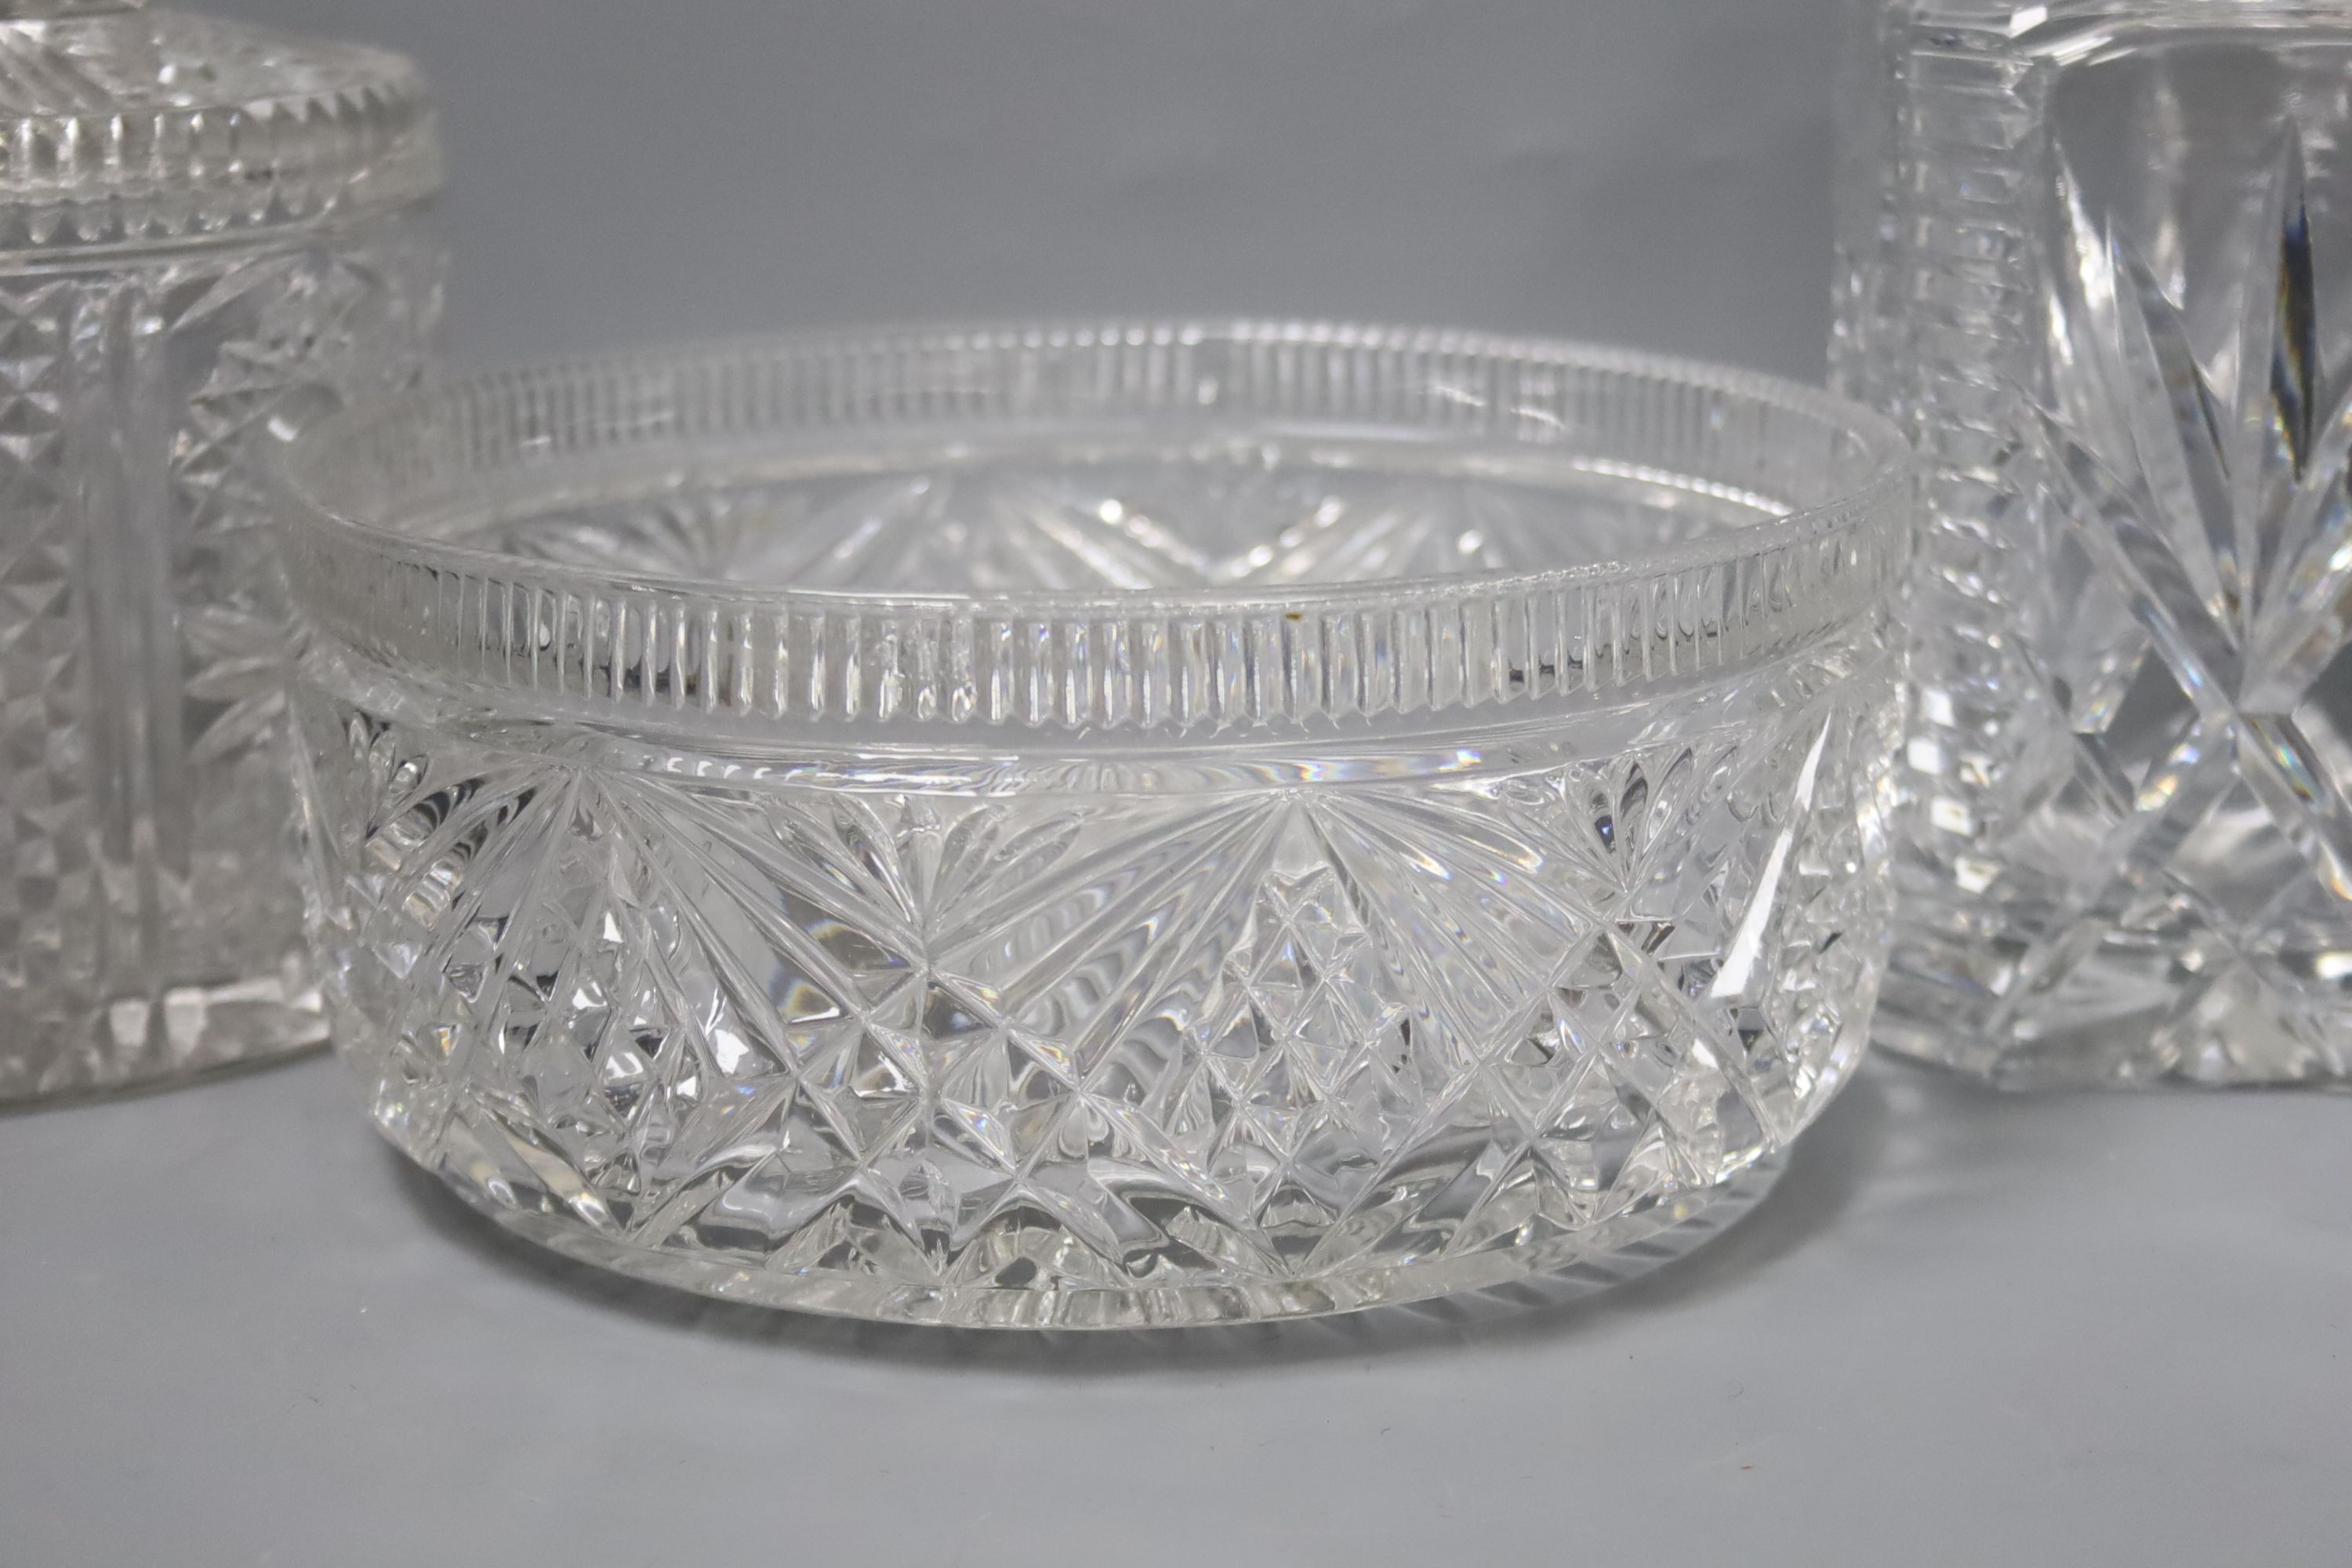 A part suite of cut glass and other glassware